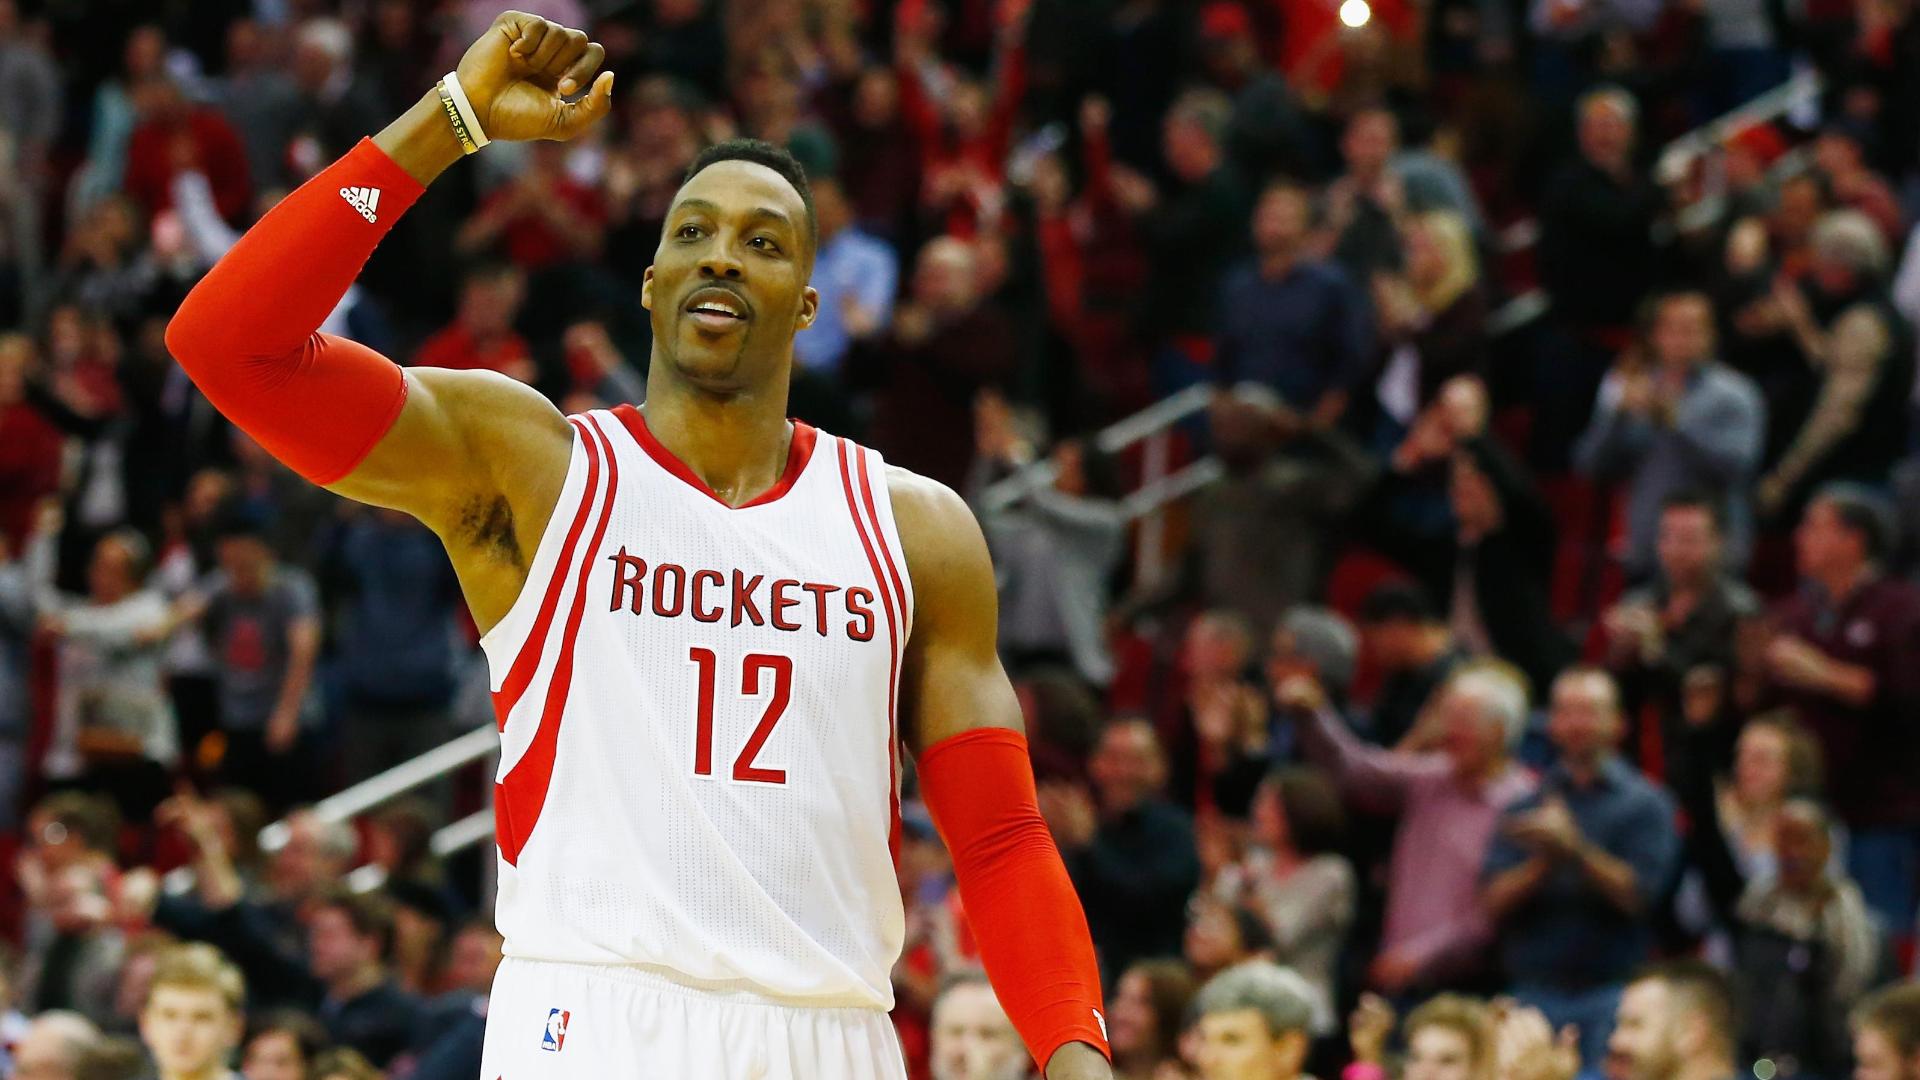 Rockets sought frontline player, first-rounder for Dwight Howard | abc7chicago.com1920 x 1080